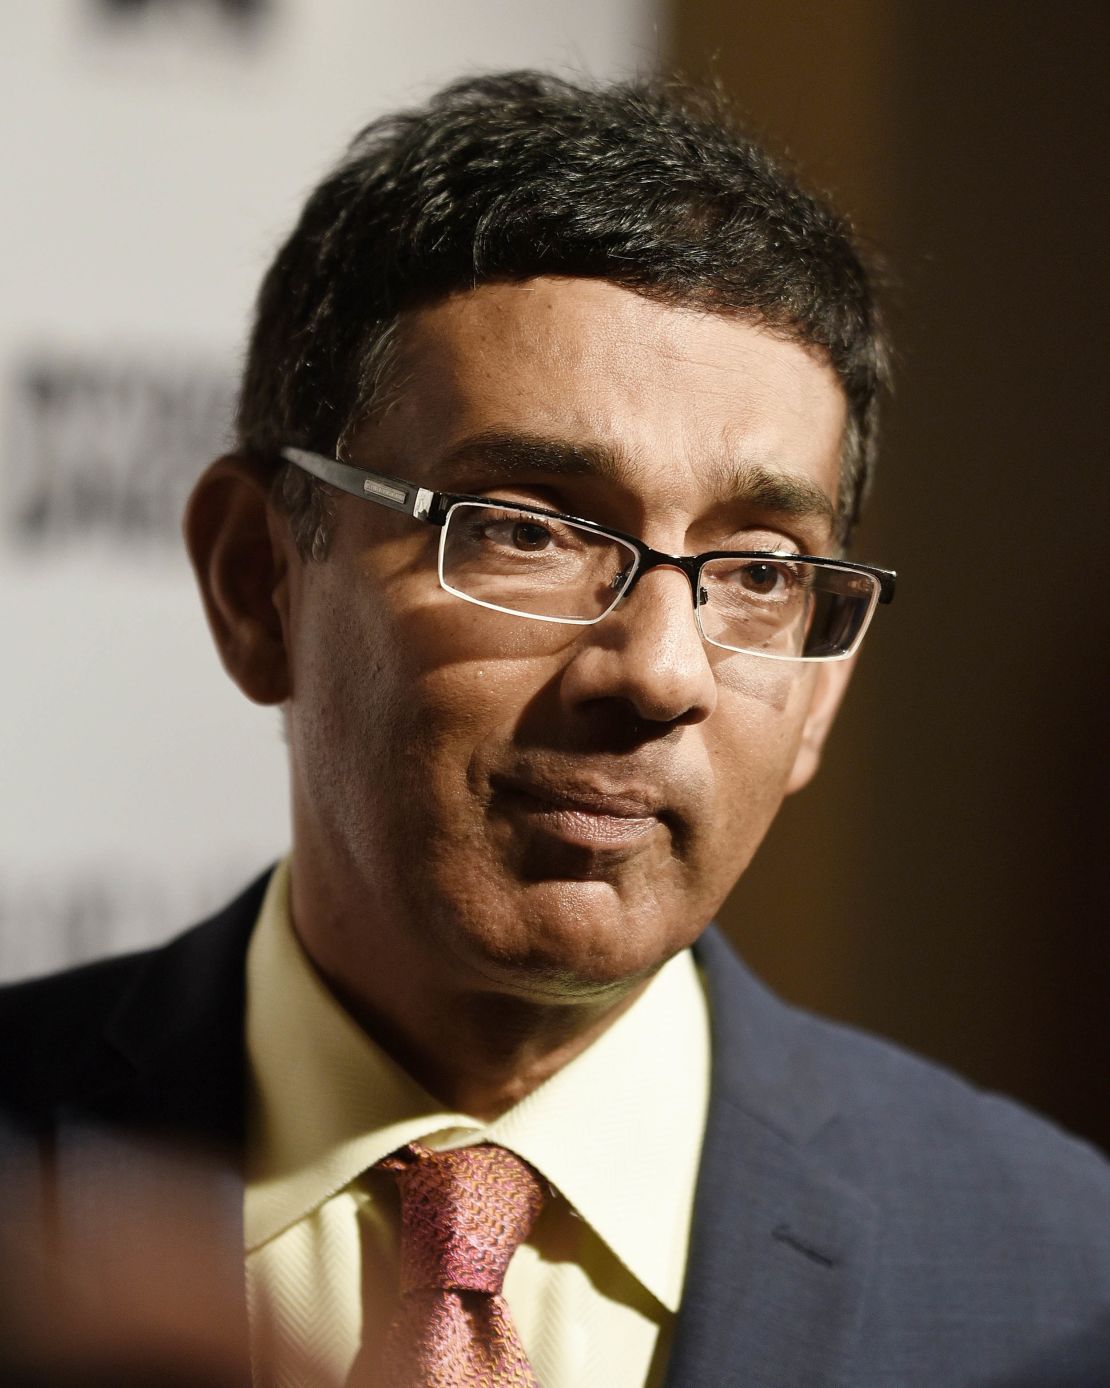 Dinesh D'Souza attends the premiere of his film, "Death of a Nation," at E Street Cinema in August 2018 in Washington, DC.